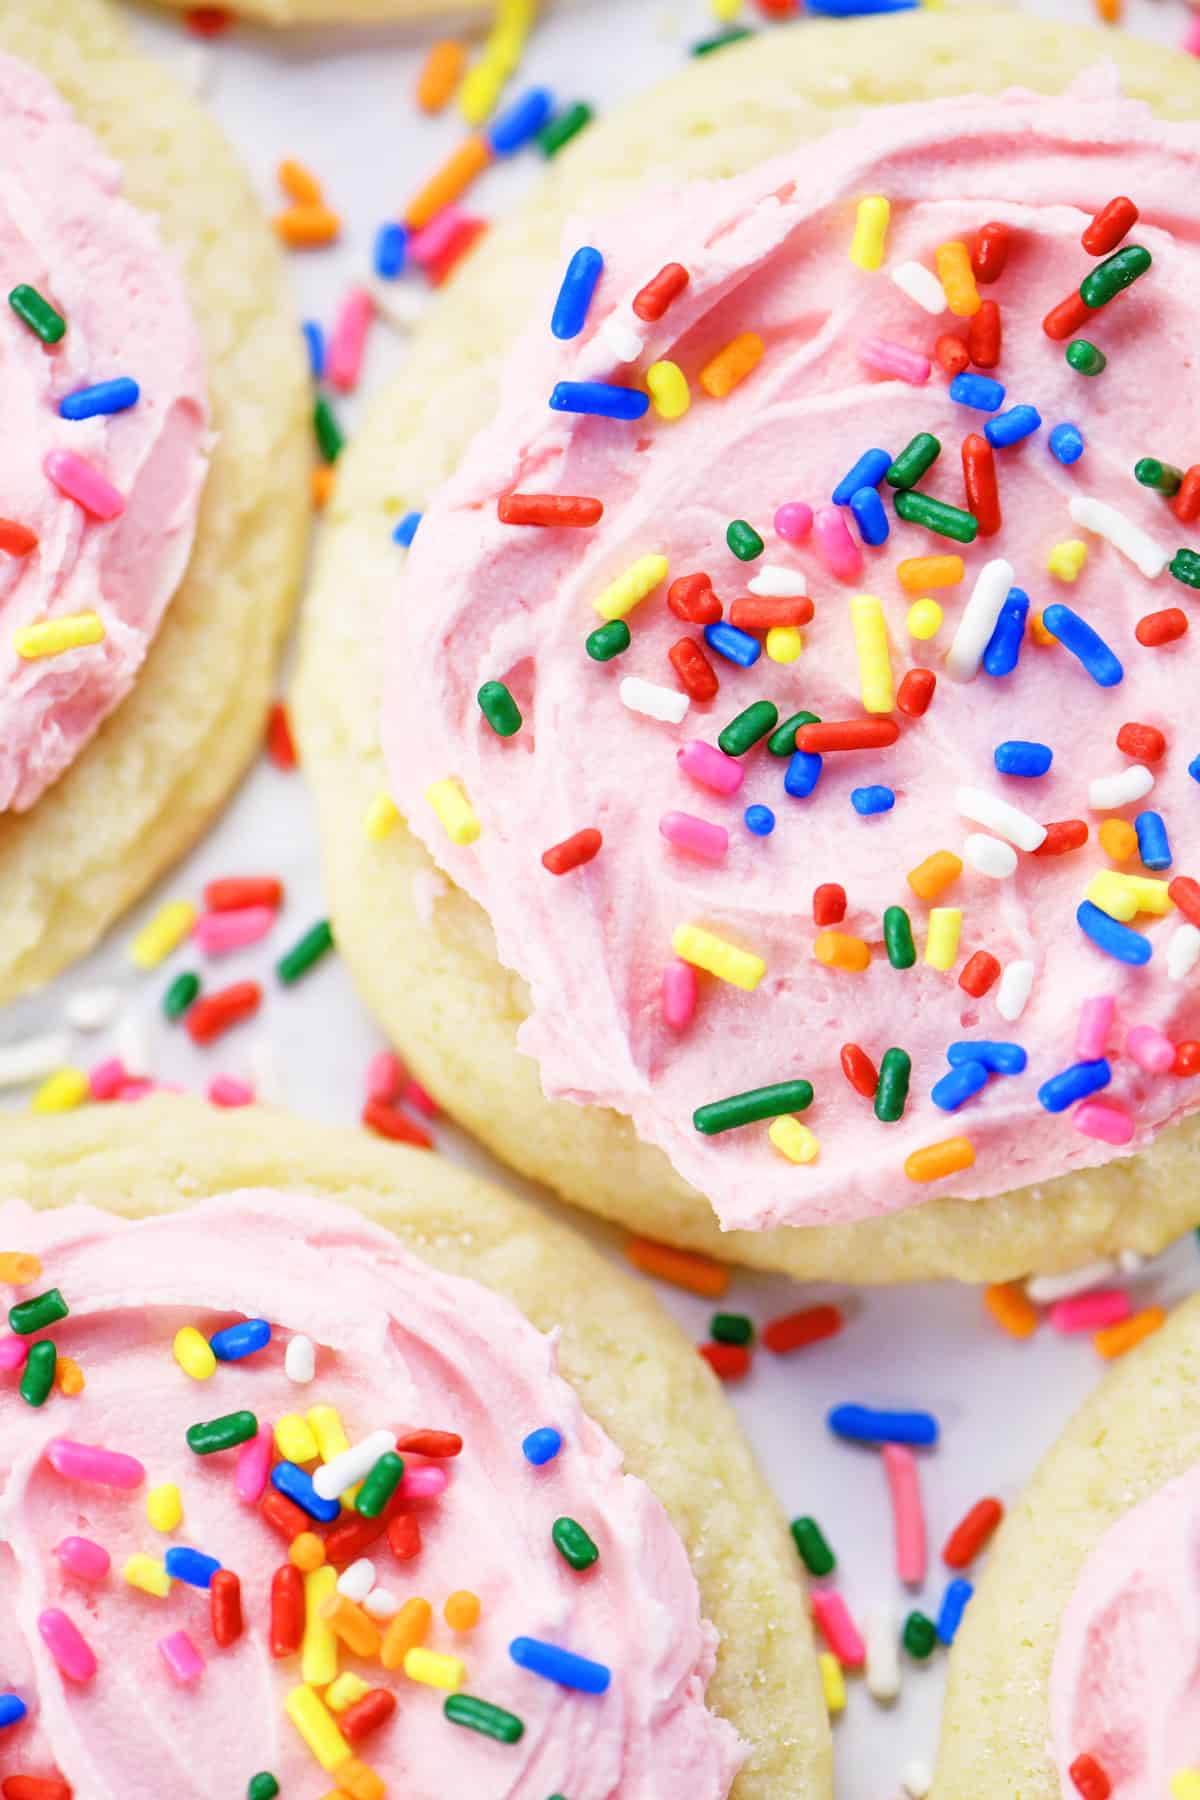 Sugar cookies with buttercream frosting and sprinkles.